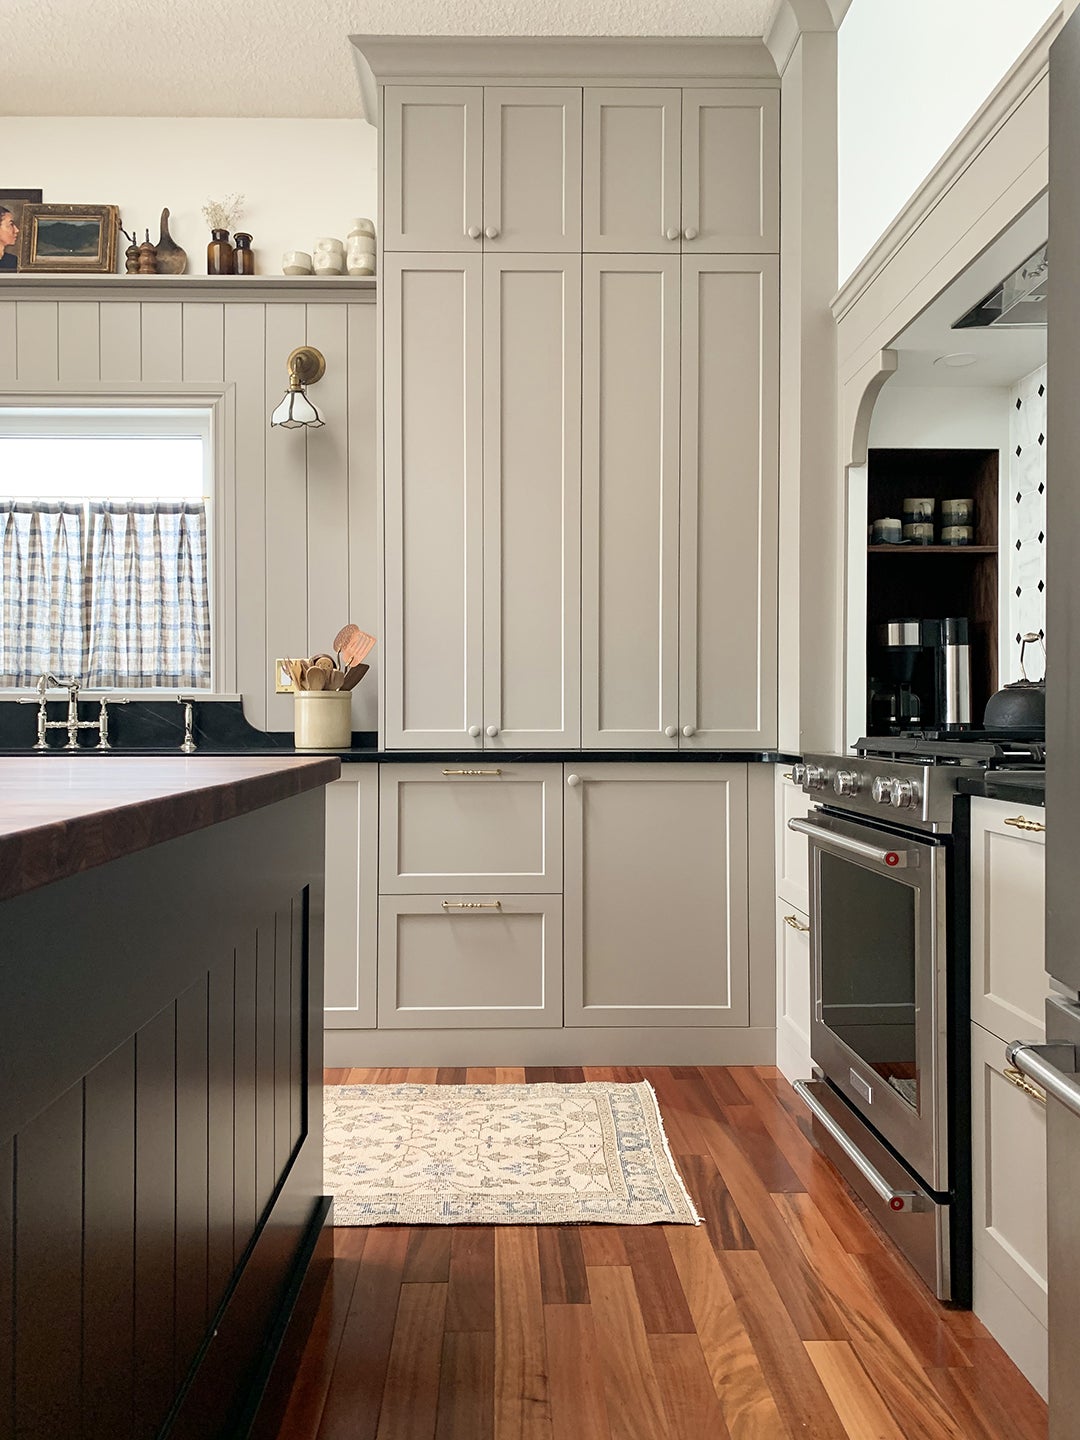 Tearing Out a Corner Pantry Fixed Multiple Layout Problems in This Canadian Kitchen